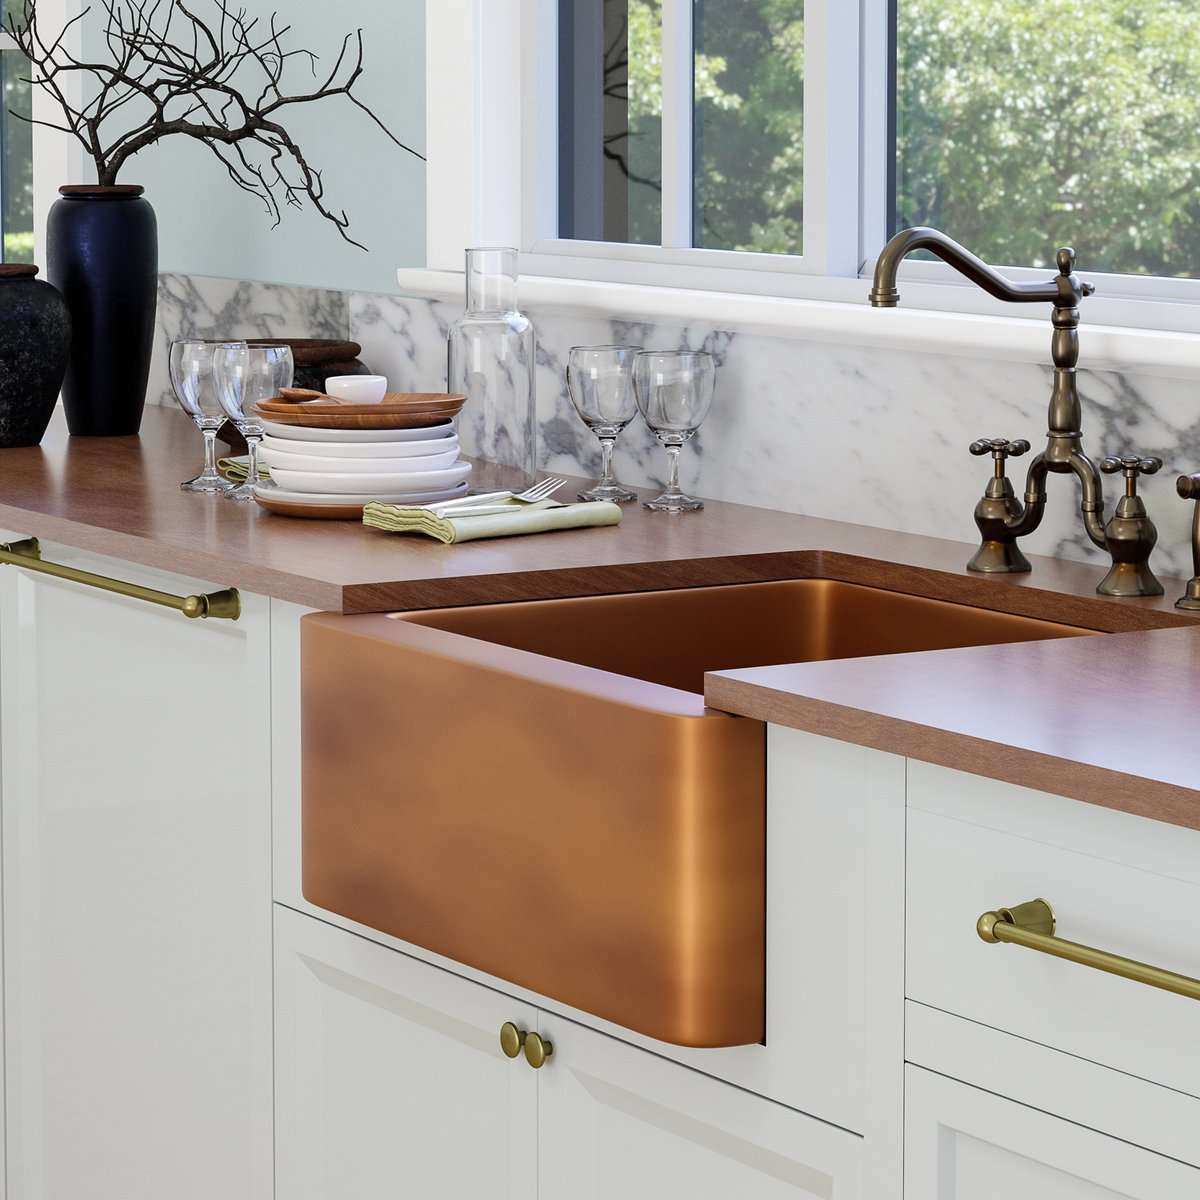 This copper farmer sink will is a classic sleek design, and smooth front.

#barclayproducts #homedecor 
#homedesign #interiordesigner 
#interiordecorating #moderndecor😎😎😎🤔🤔🤔🤔 DesignTrends InteriorInspo #200ac #LasVegas #officedesign  
Original: CarlosRiggs13